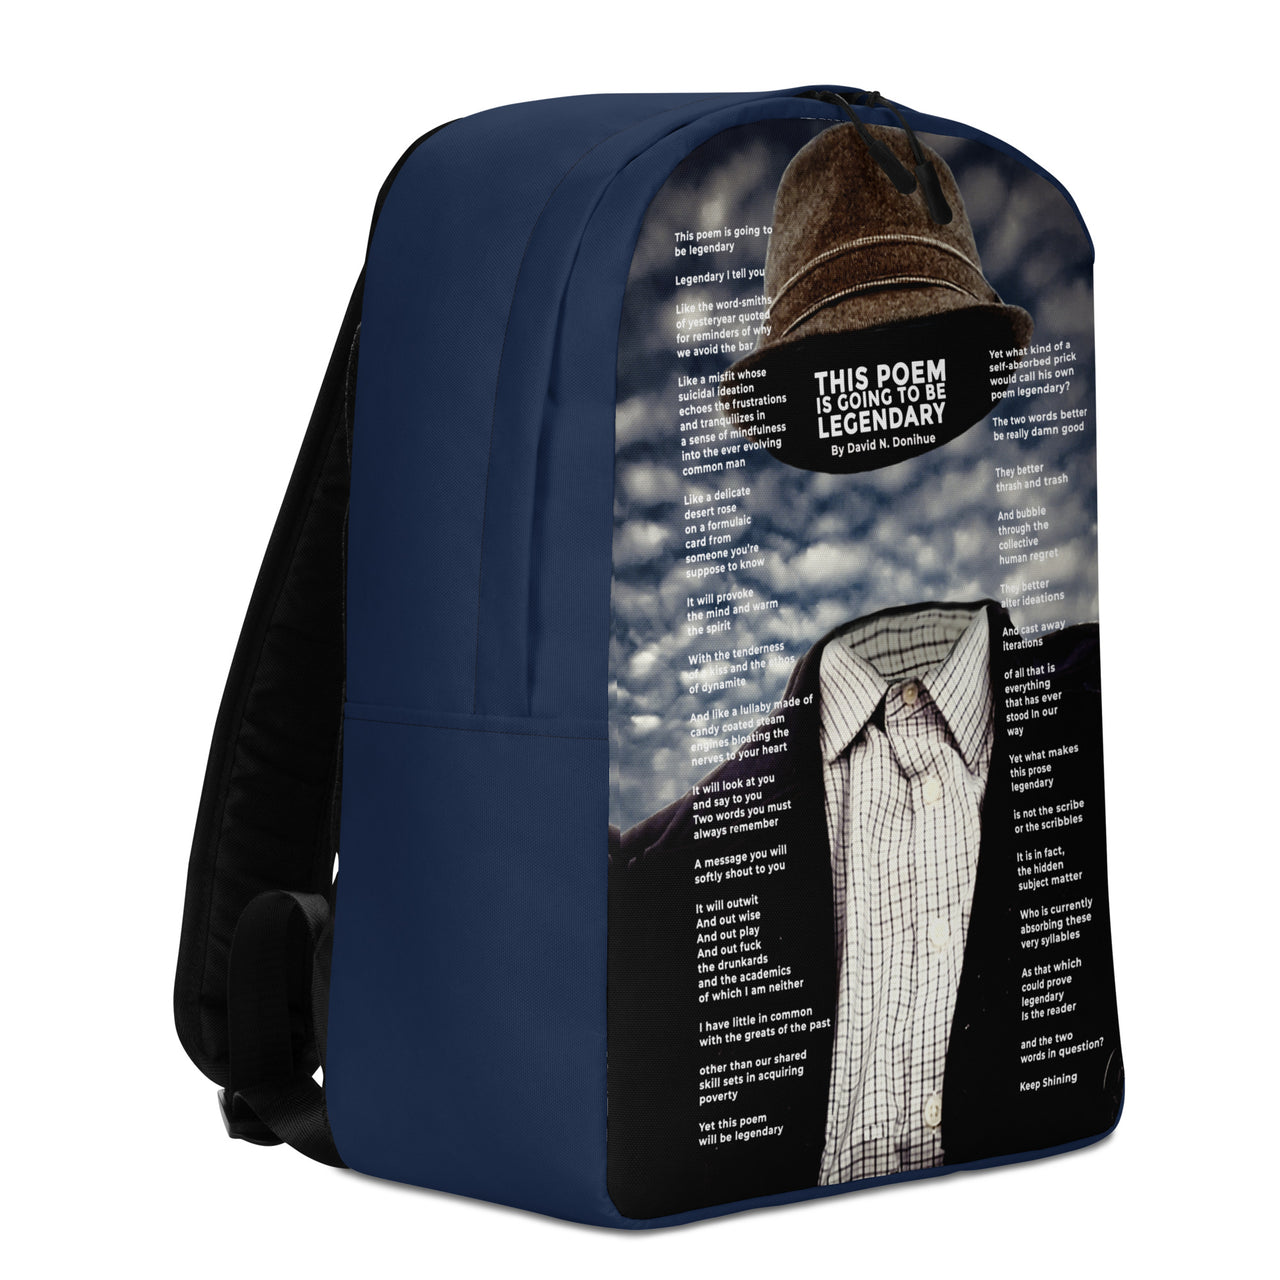 Poetry on a Backpack - THIS POEM IS GOING TO BE LEGENDARY (Poem by David N Donihue)